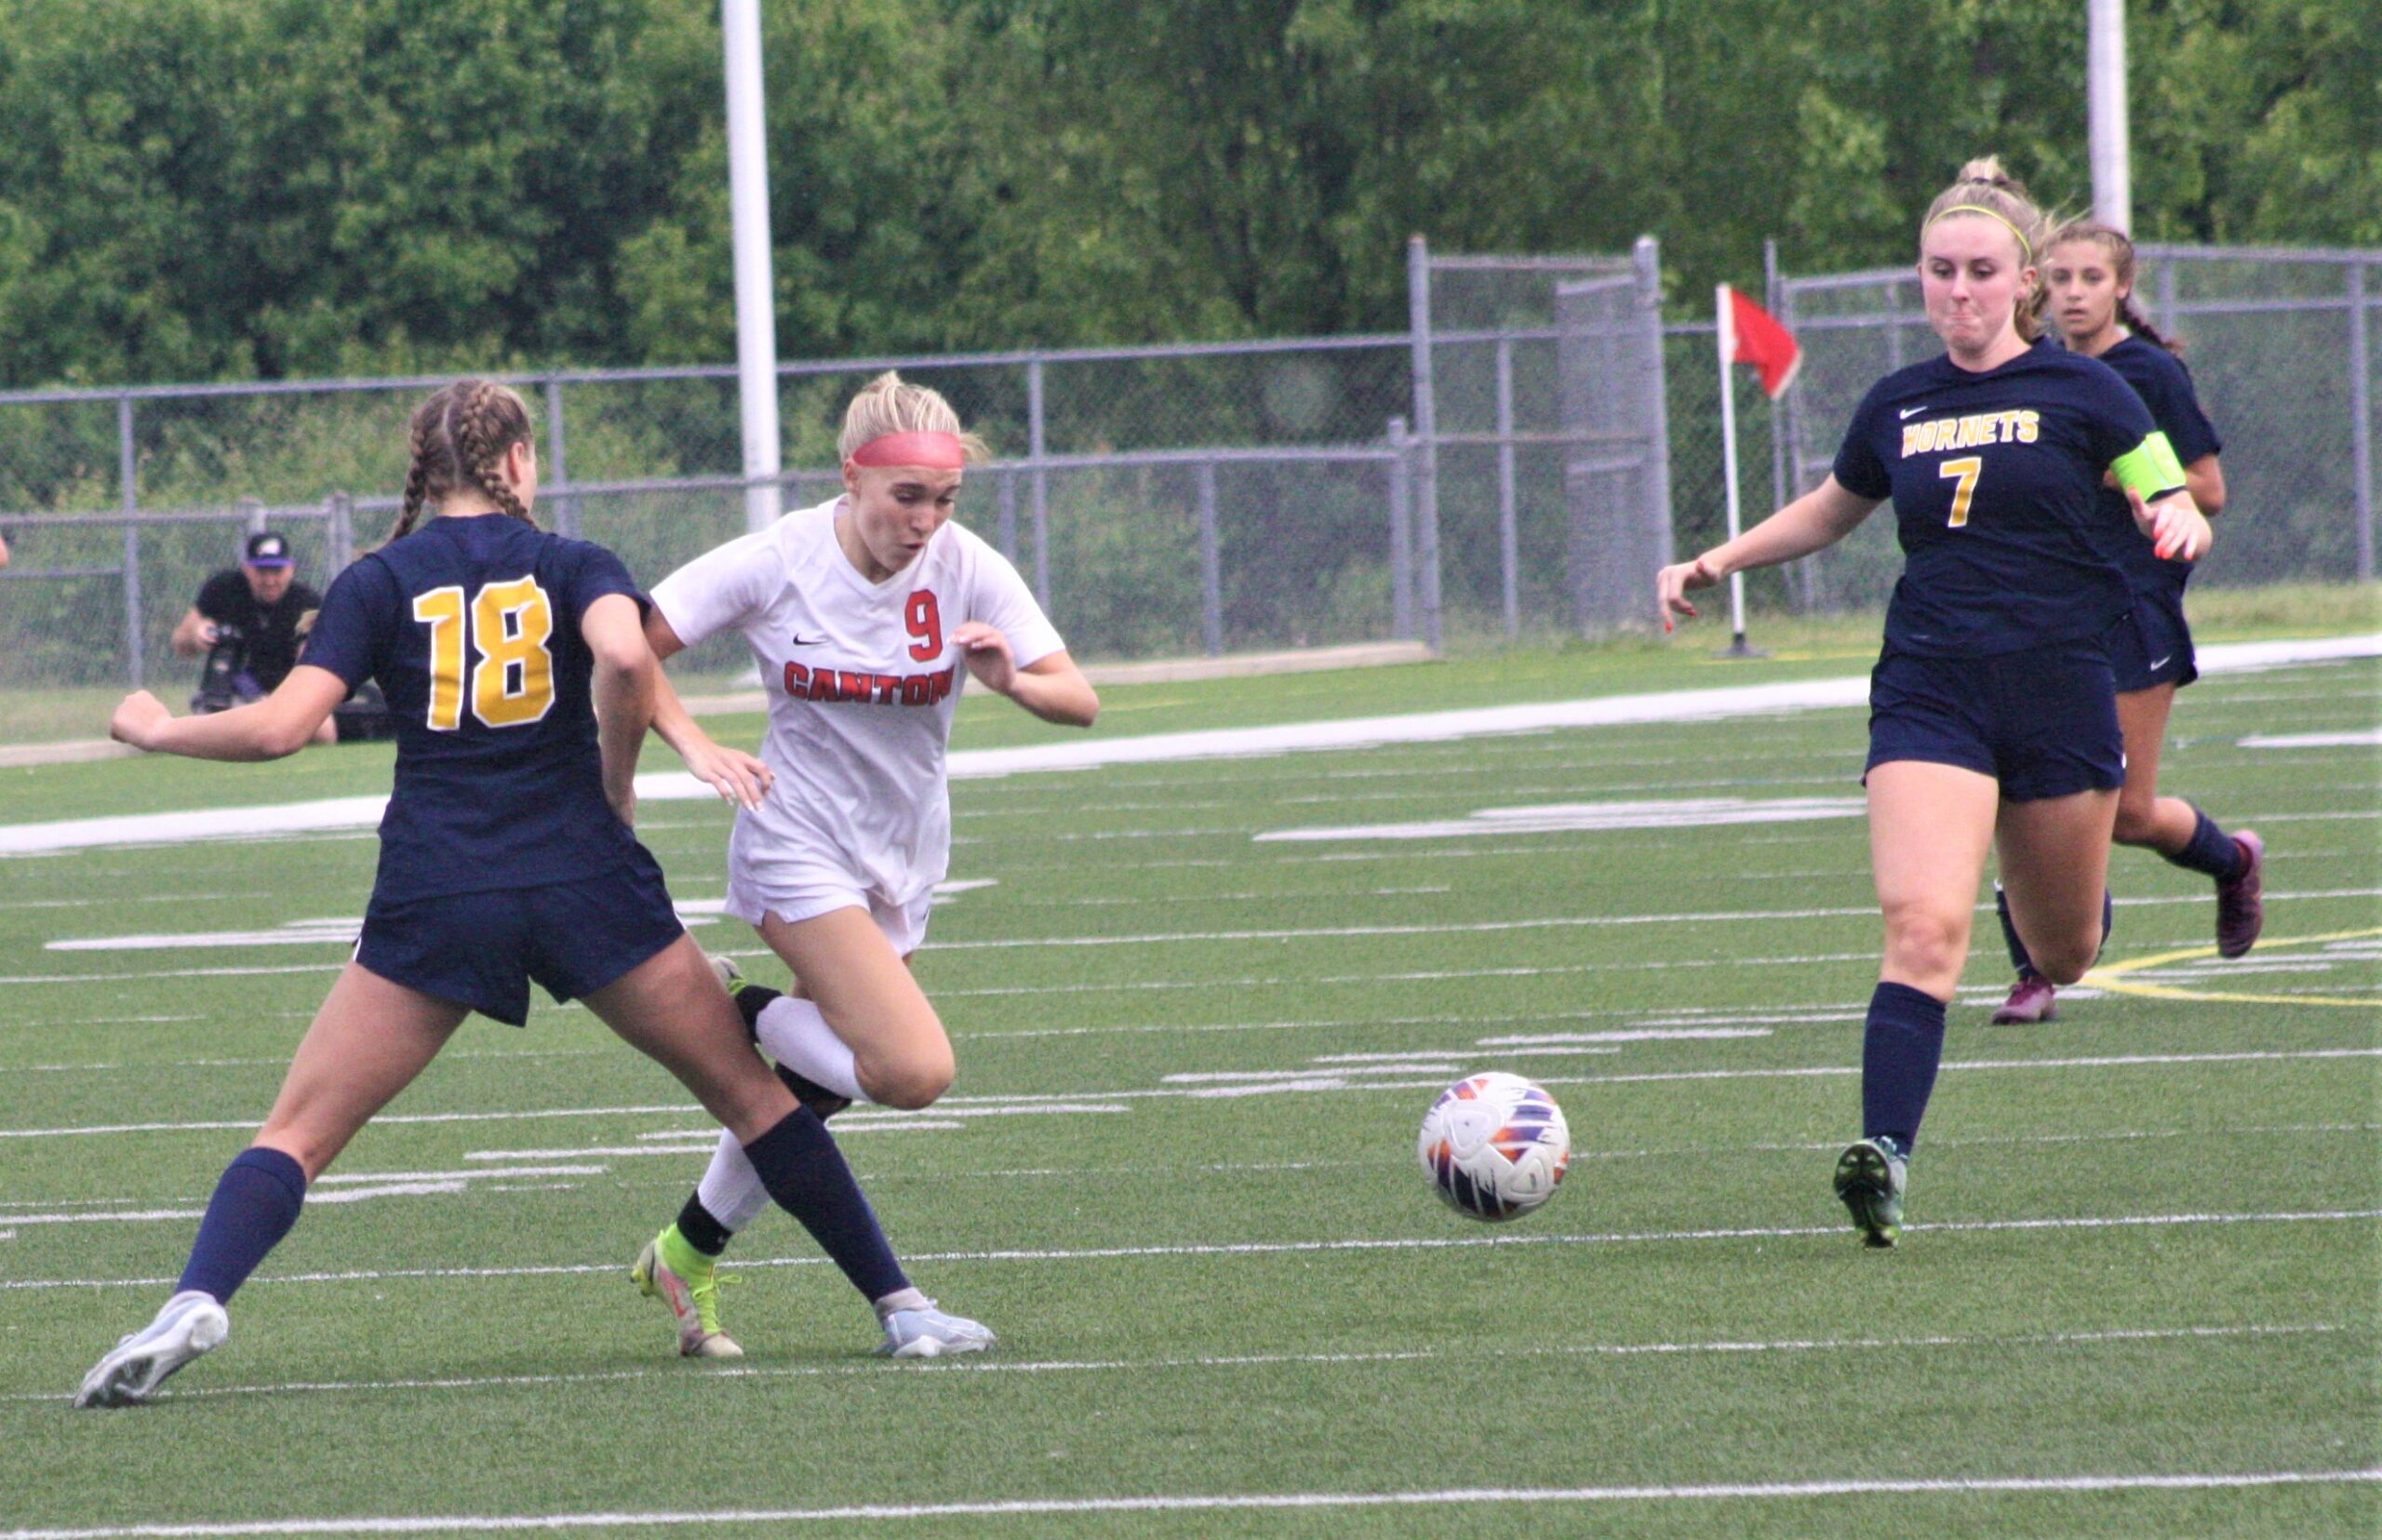 Canton forward Carly Noe appeared to be tripped on this rush but no foul was called